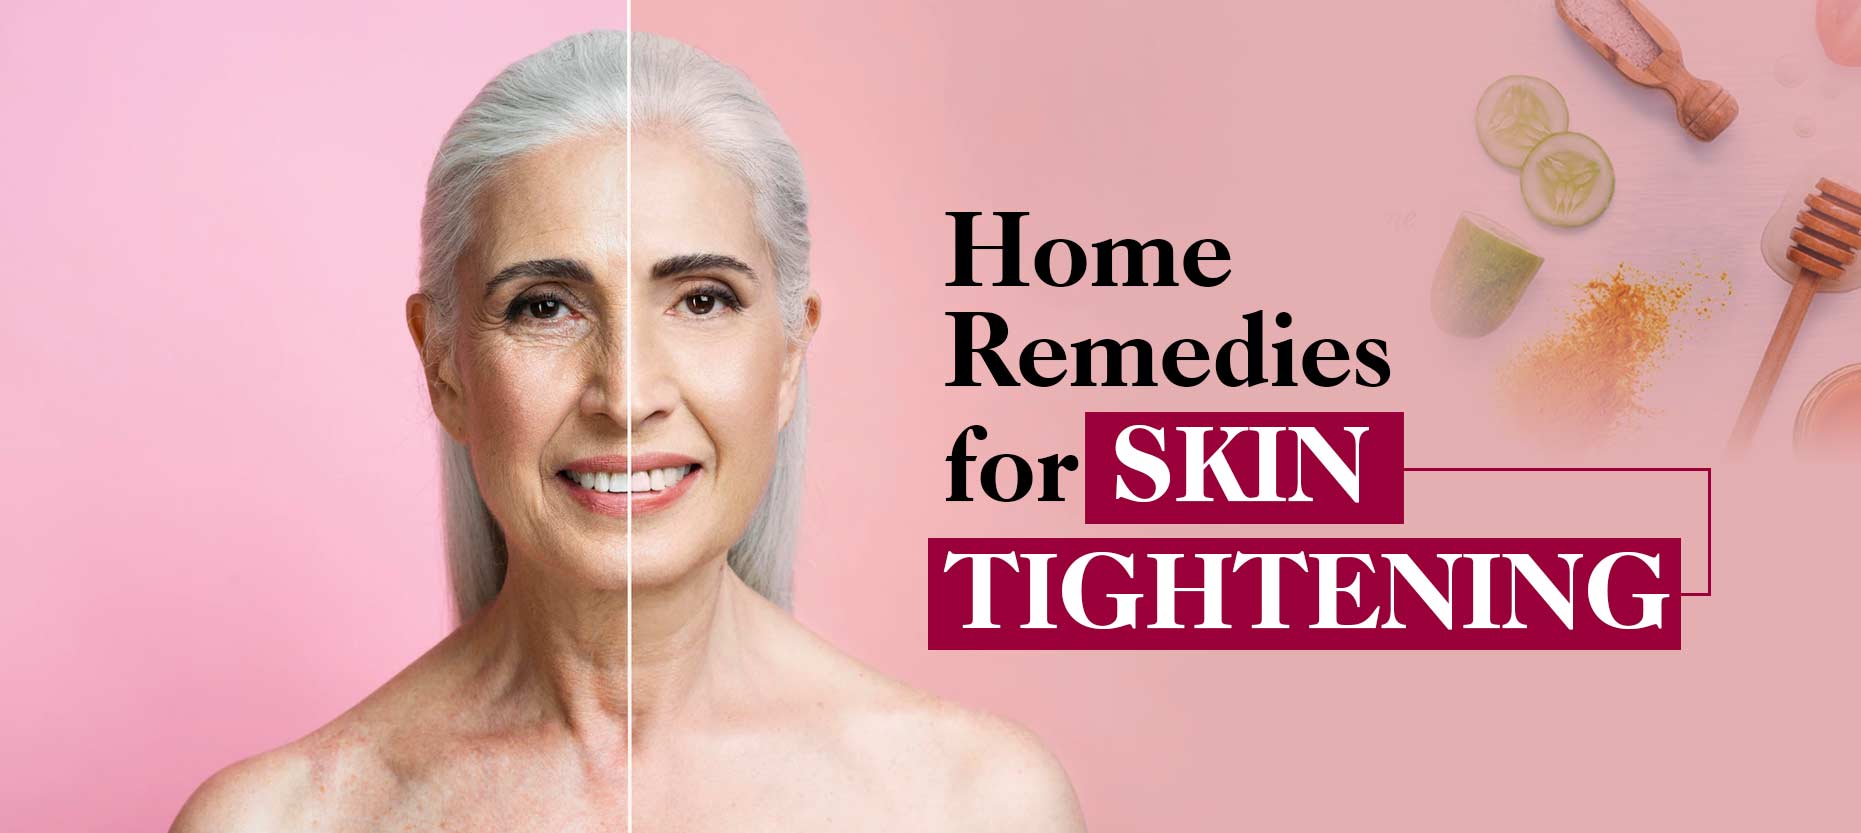 Home Remedies For Skin Tightening